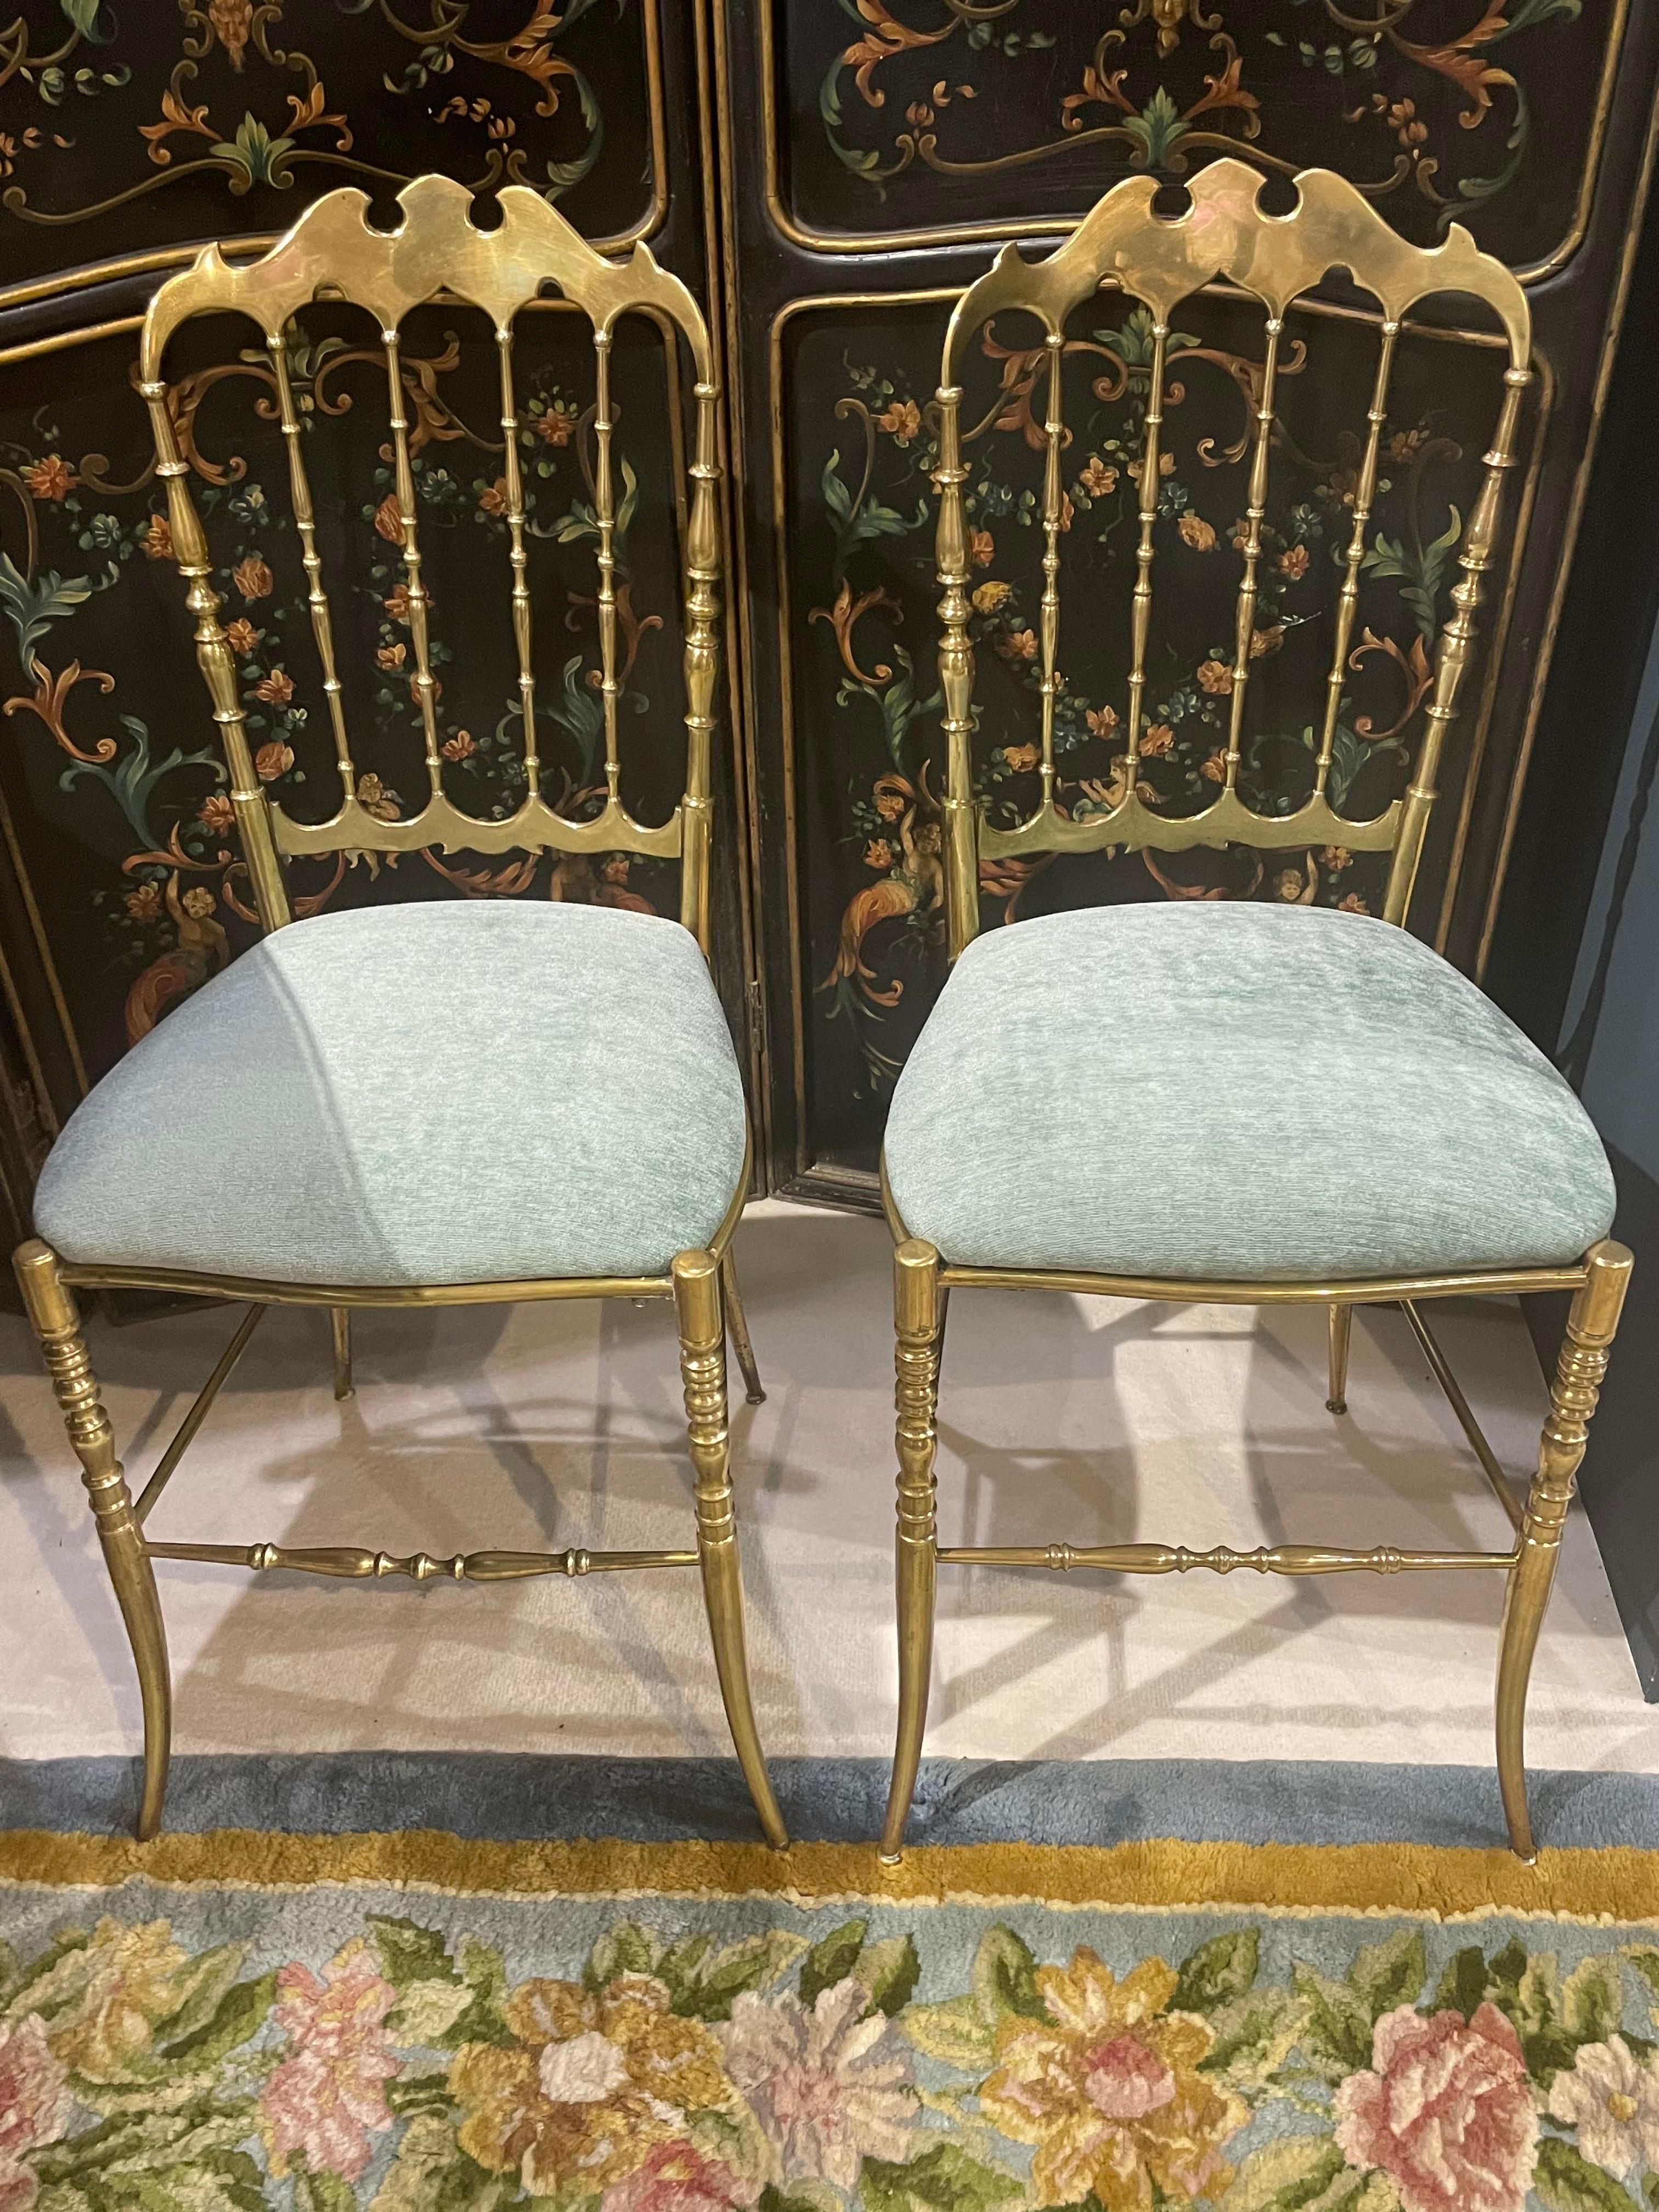 Pair of Chiavari chairs, made of solid gilded brass with newly upholstered seats in green water velvet. Made in Liguria in Italy.